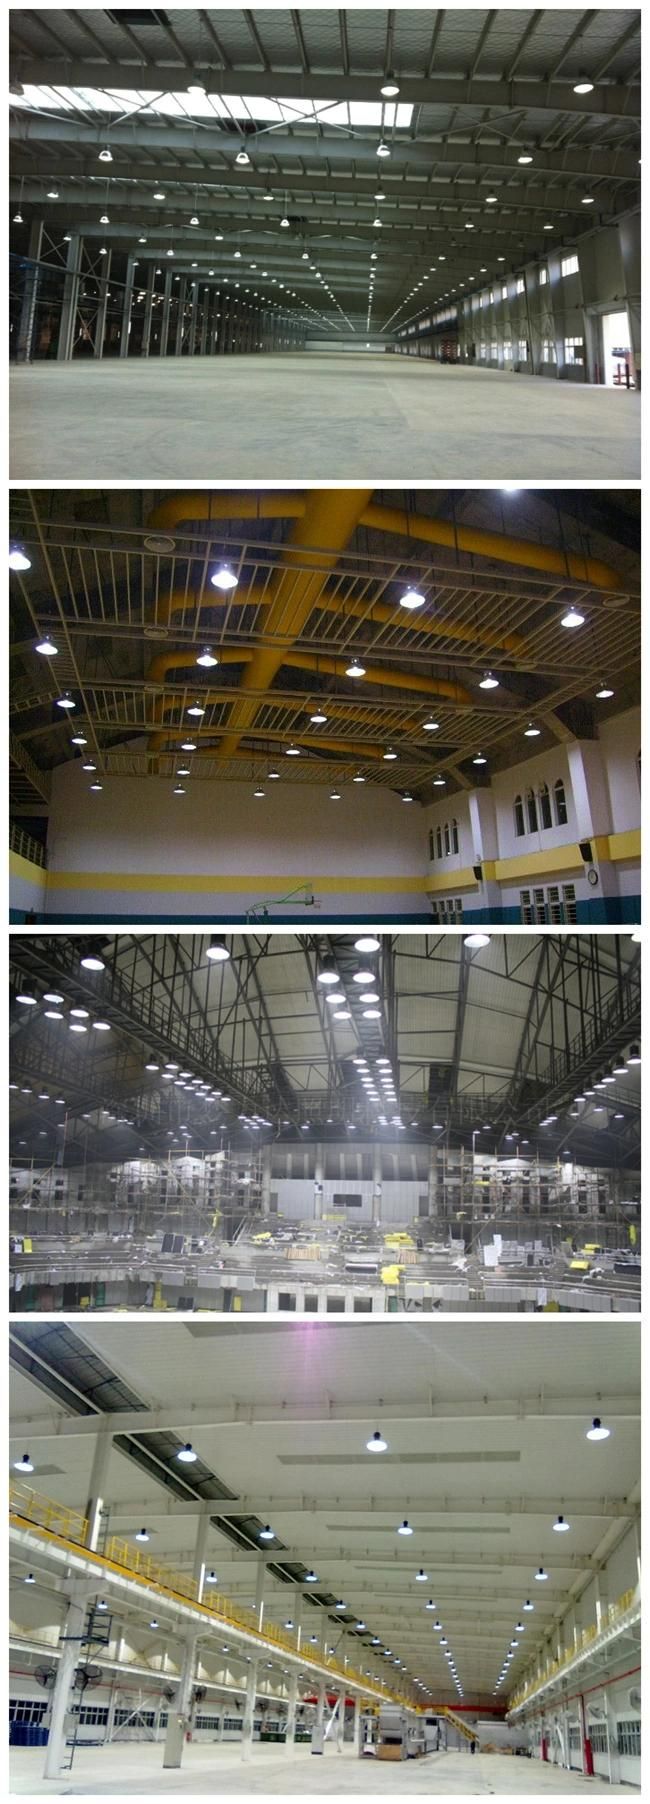 High Efficiency Lumileds SMD3030 Indoor 100W High Bay Light Fixtures